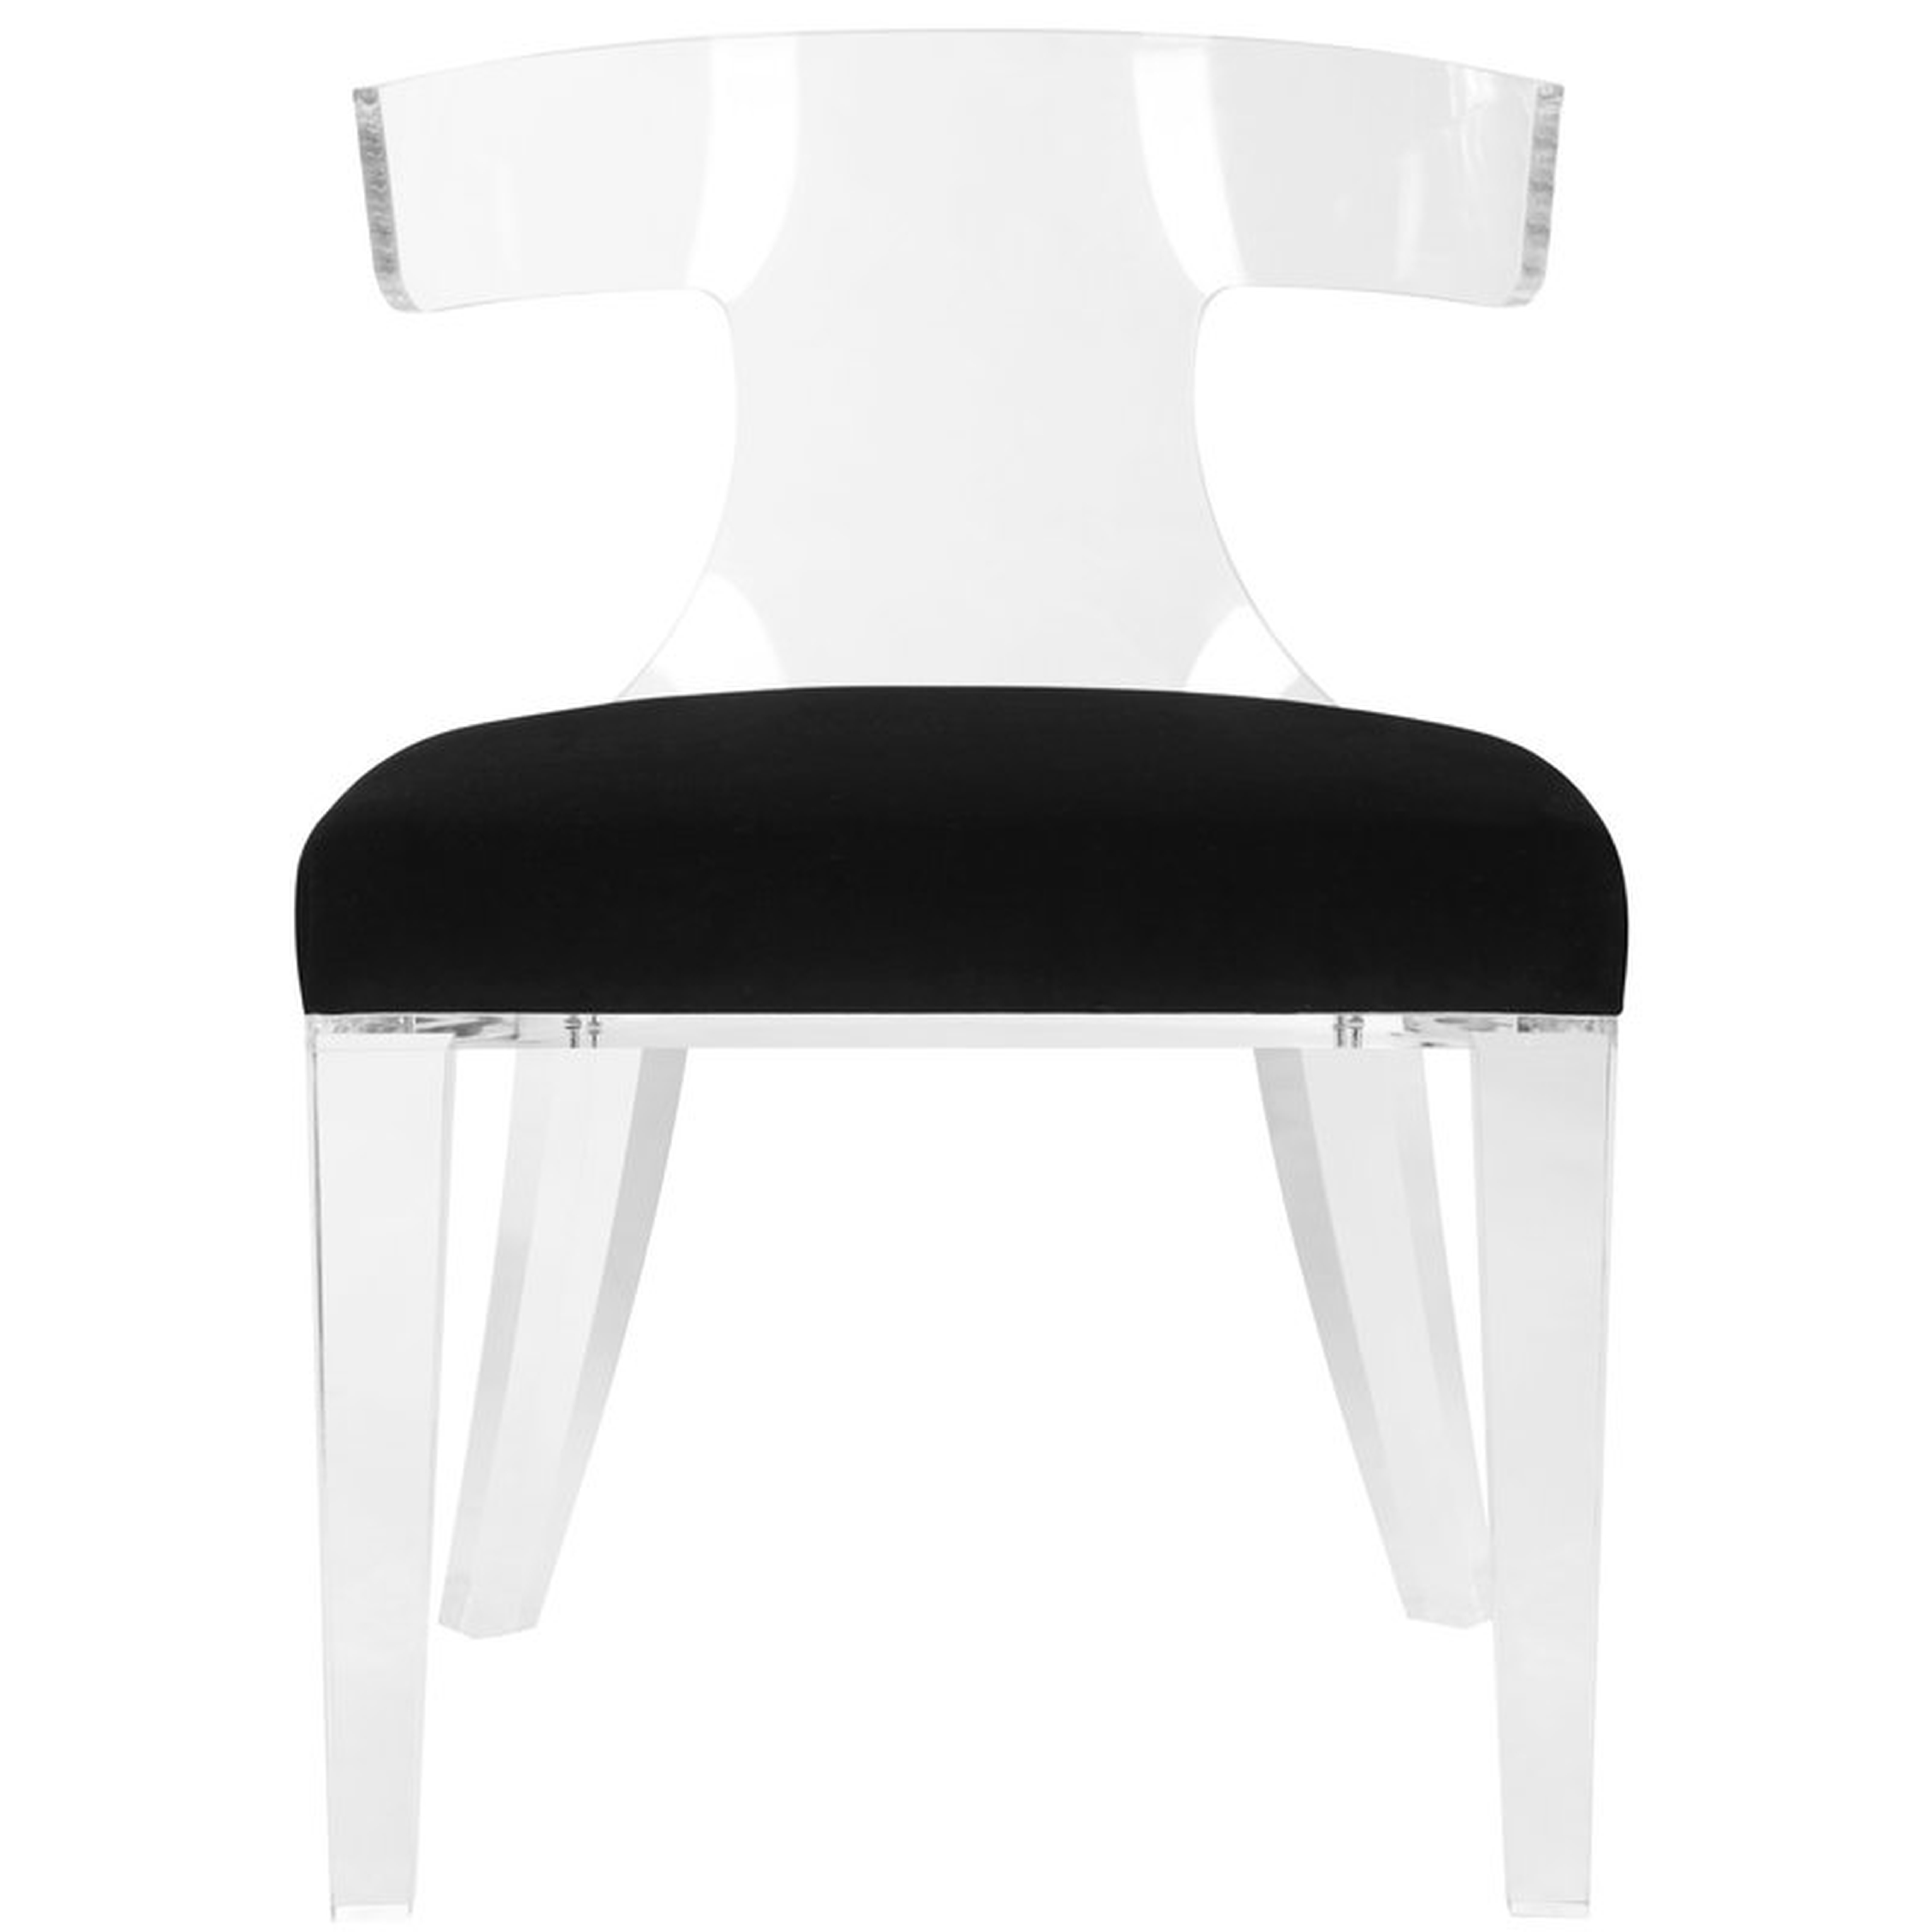 RHYS LUCITE UPHOLSTERED DINING CHAIR - Perigold